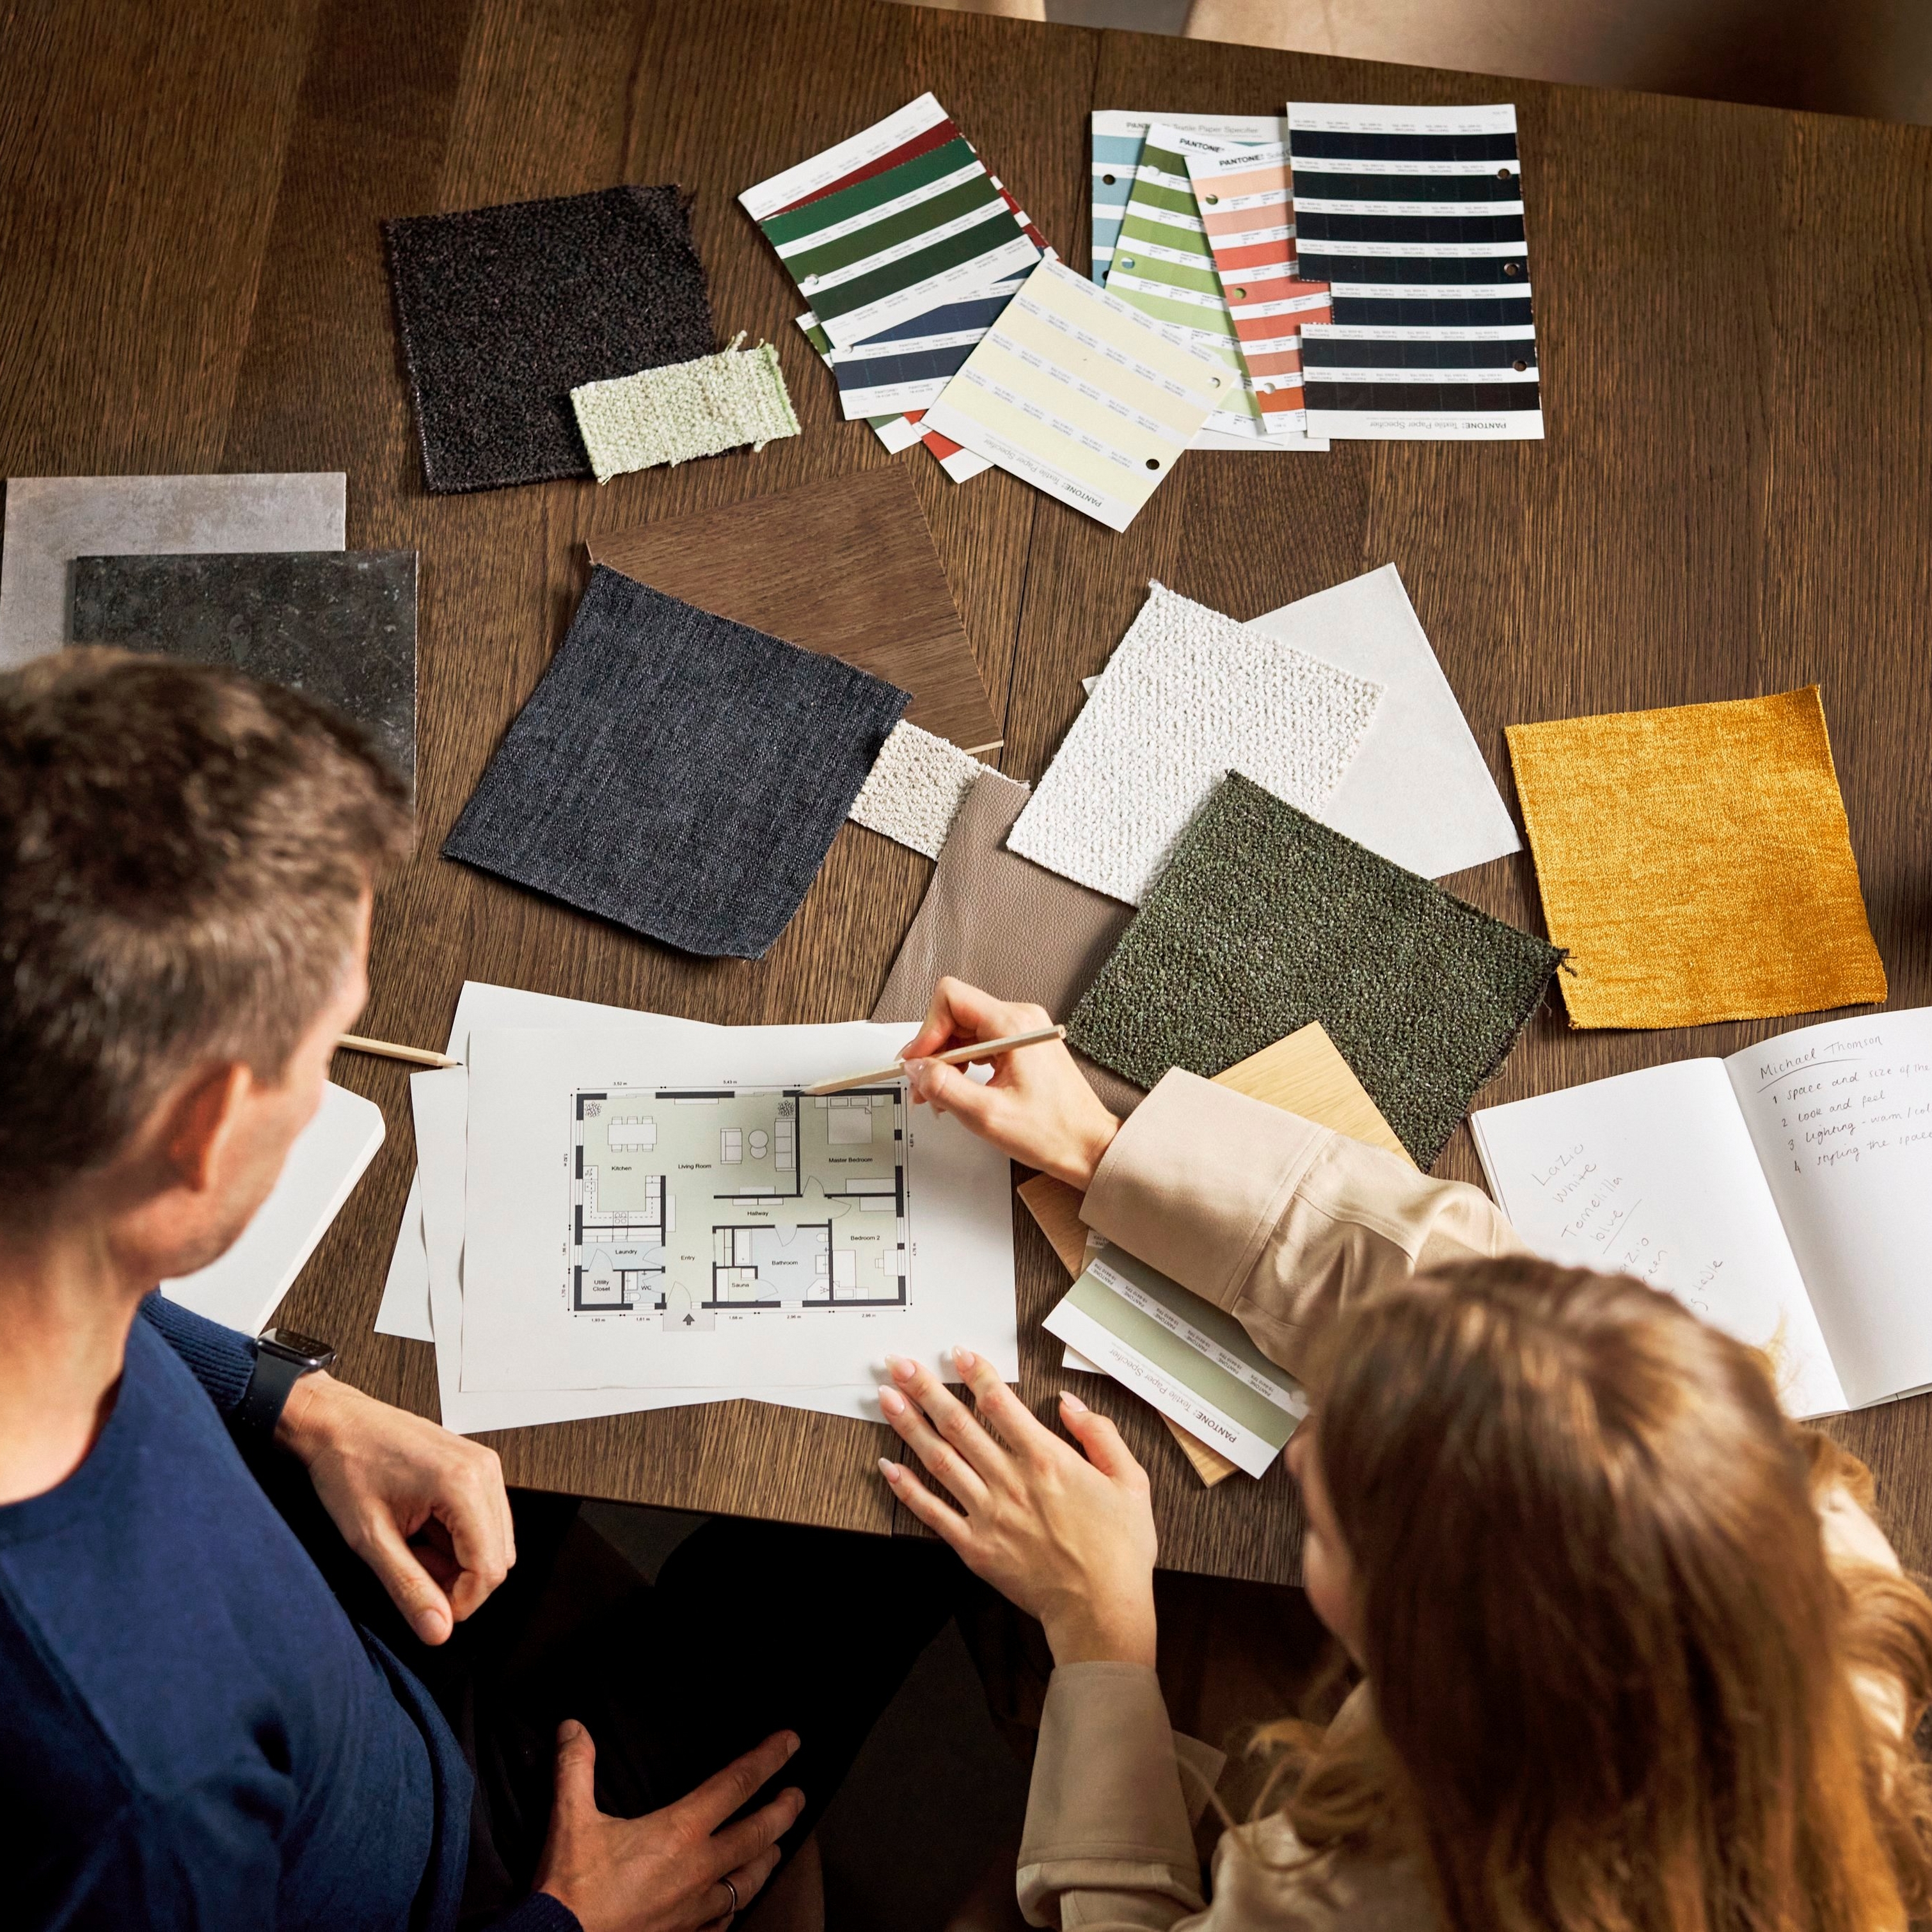 Two individuals reviewing a floor plan amid various fabric swatches on a wooden table.